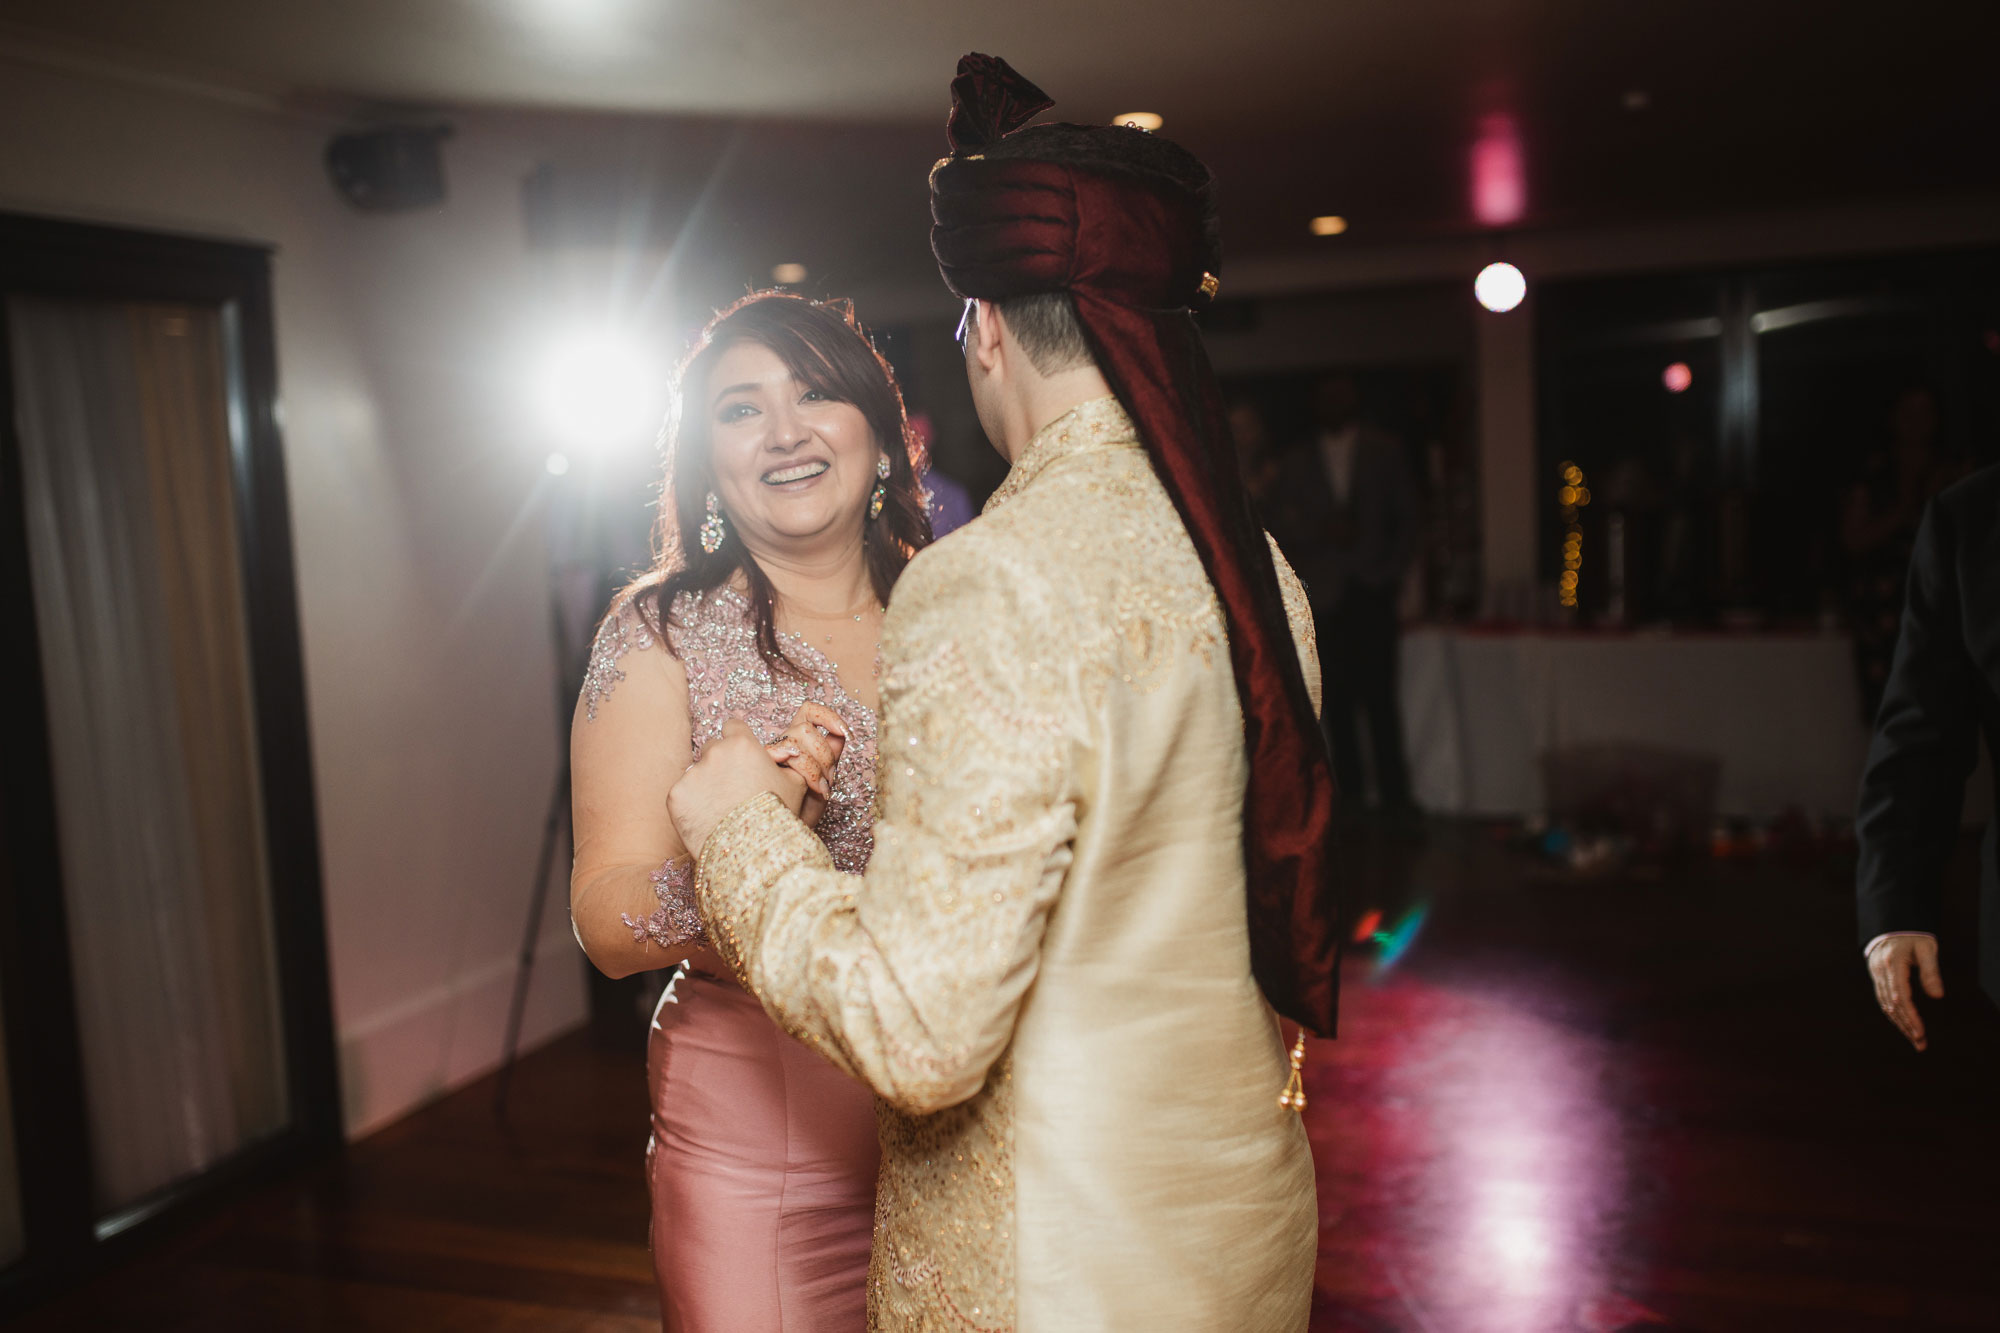 mother and groom dance